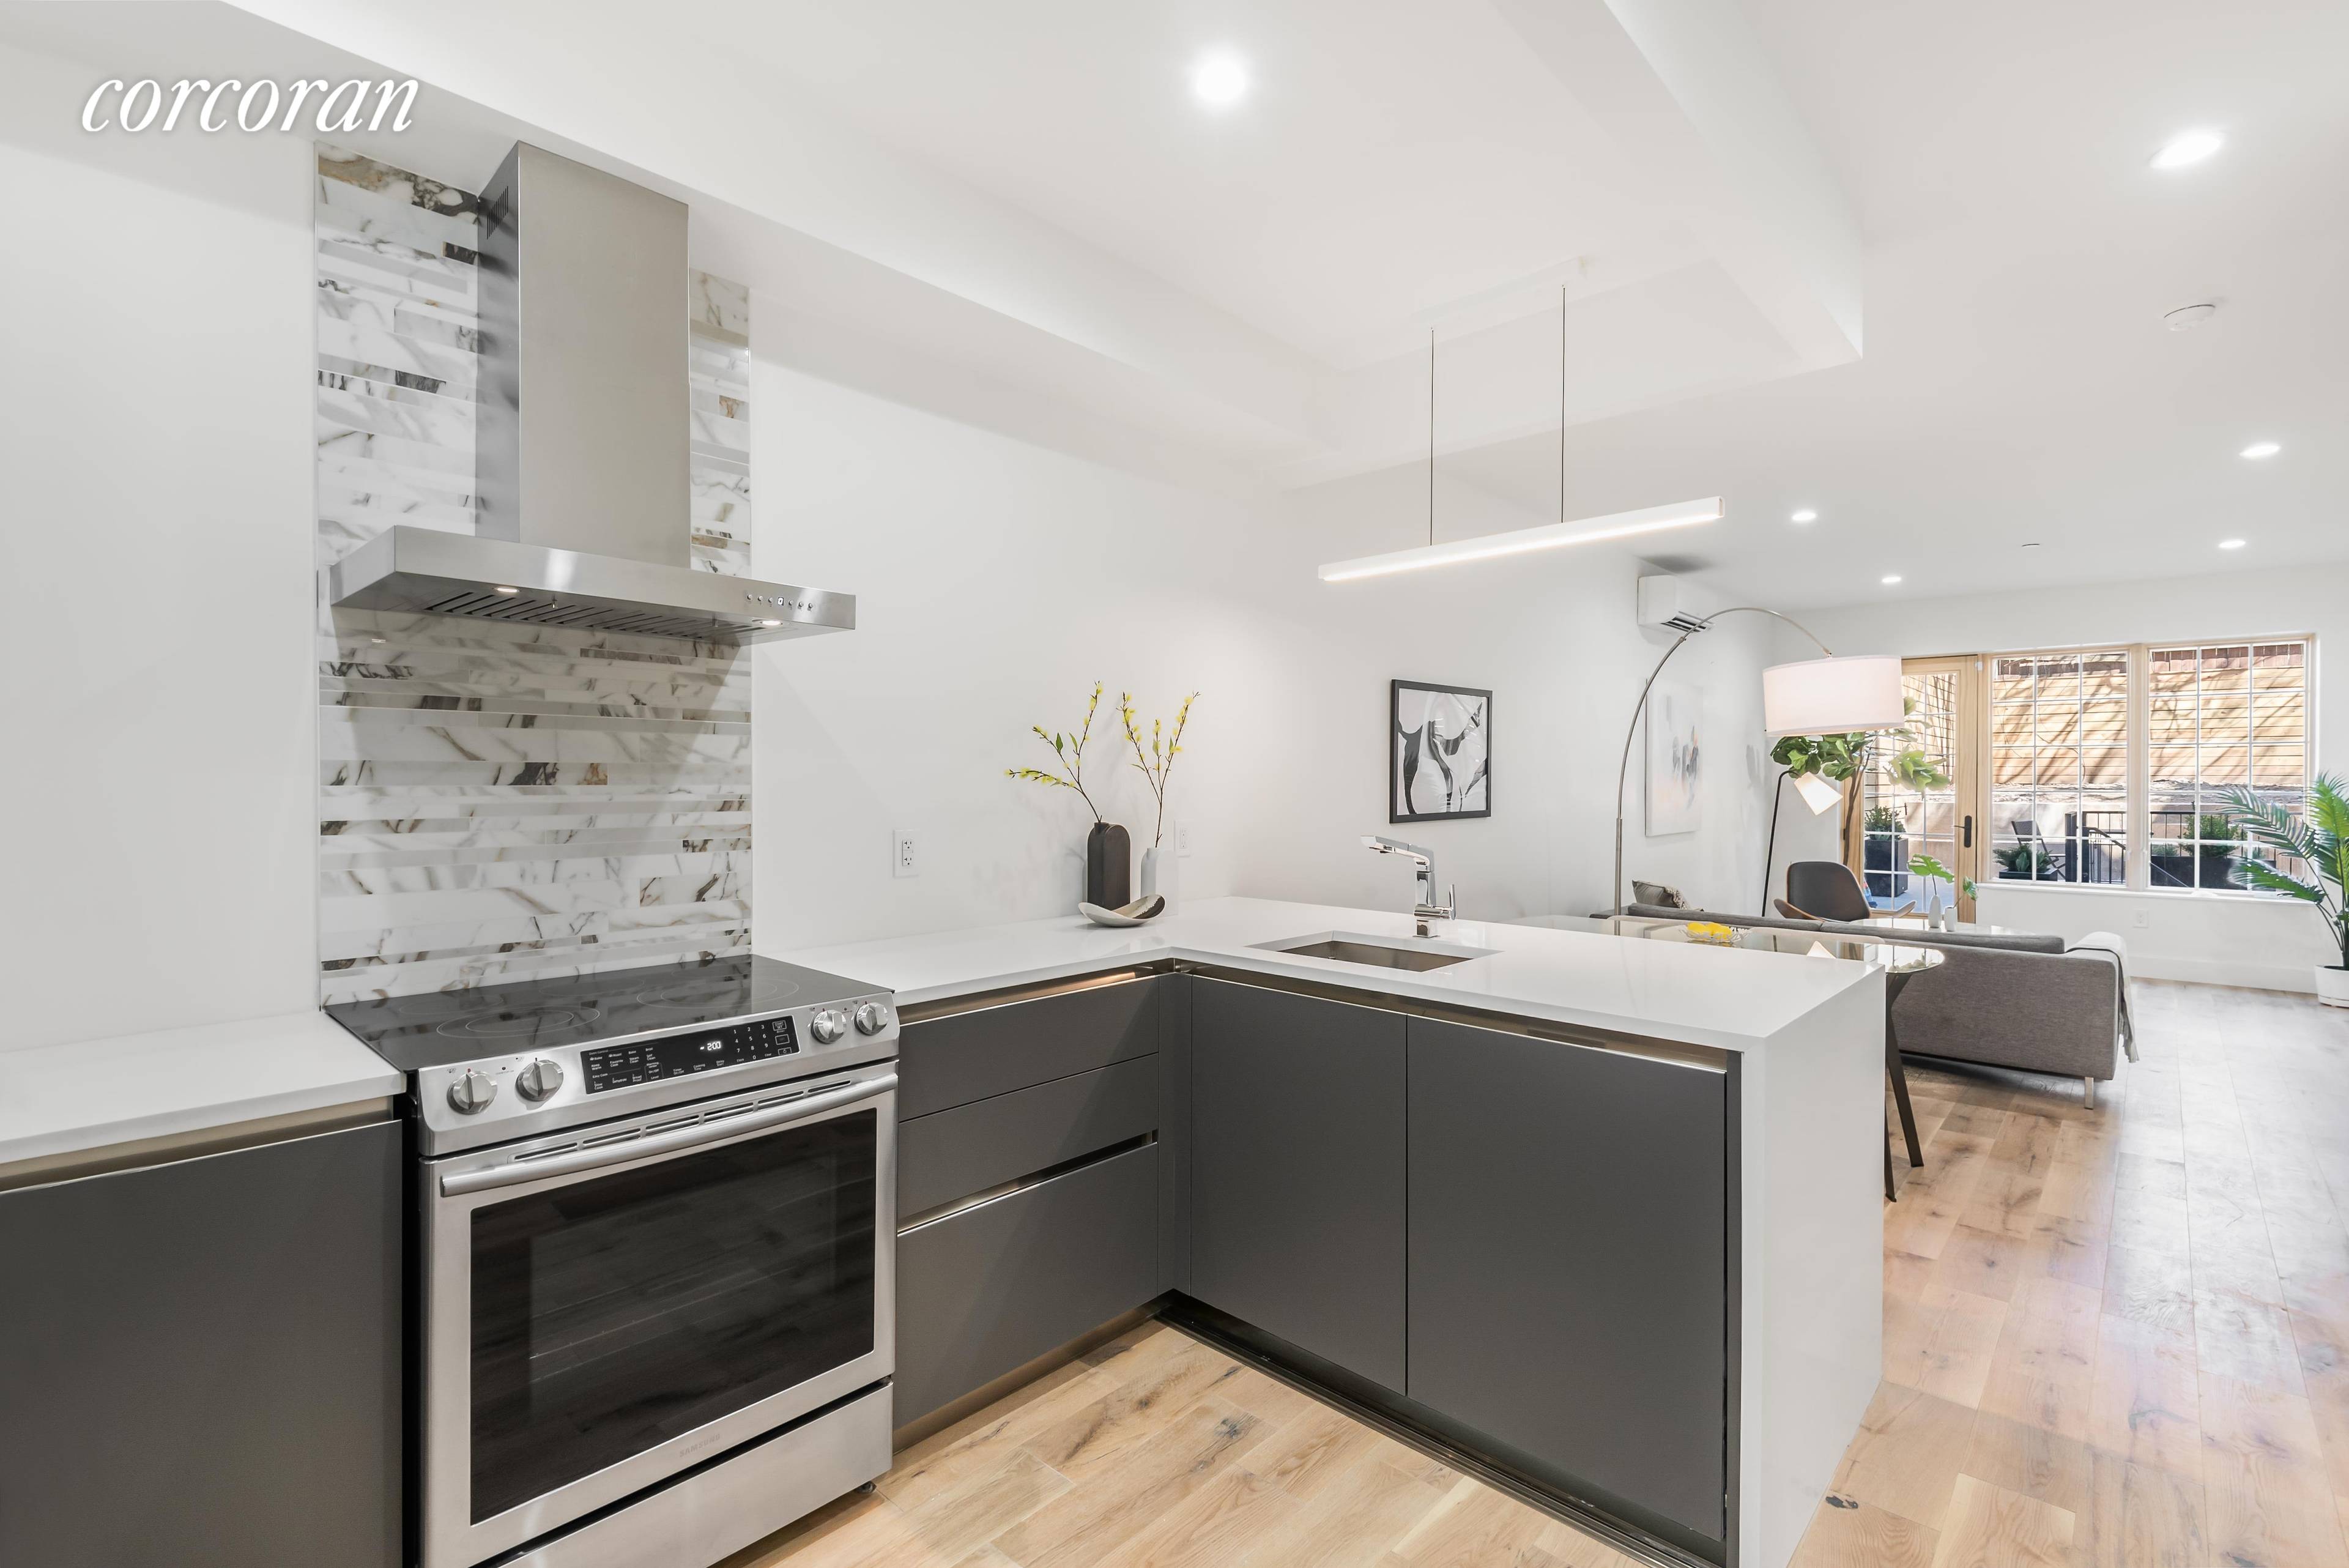 Welcome to 85 Carlton Avenue, Fort Greene's newest condo building !